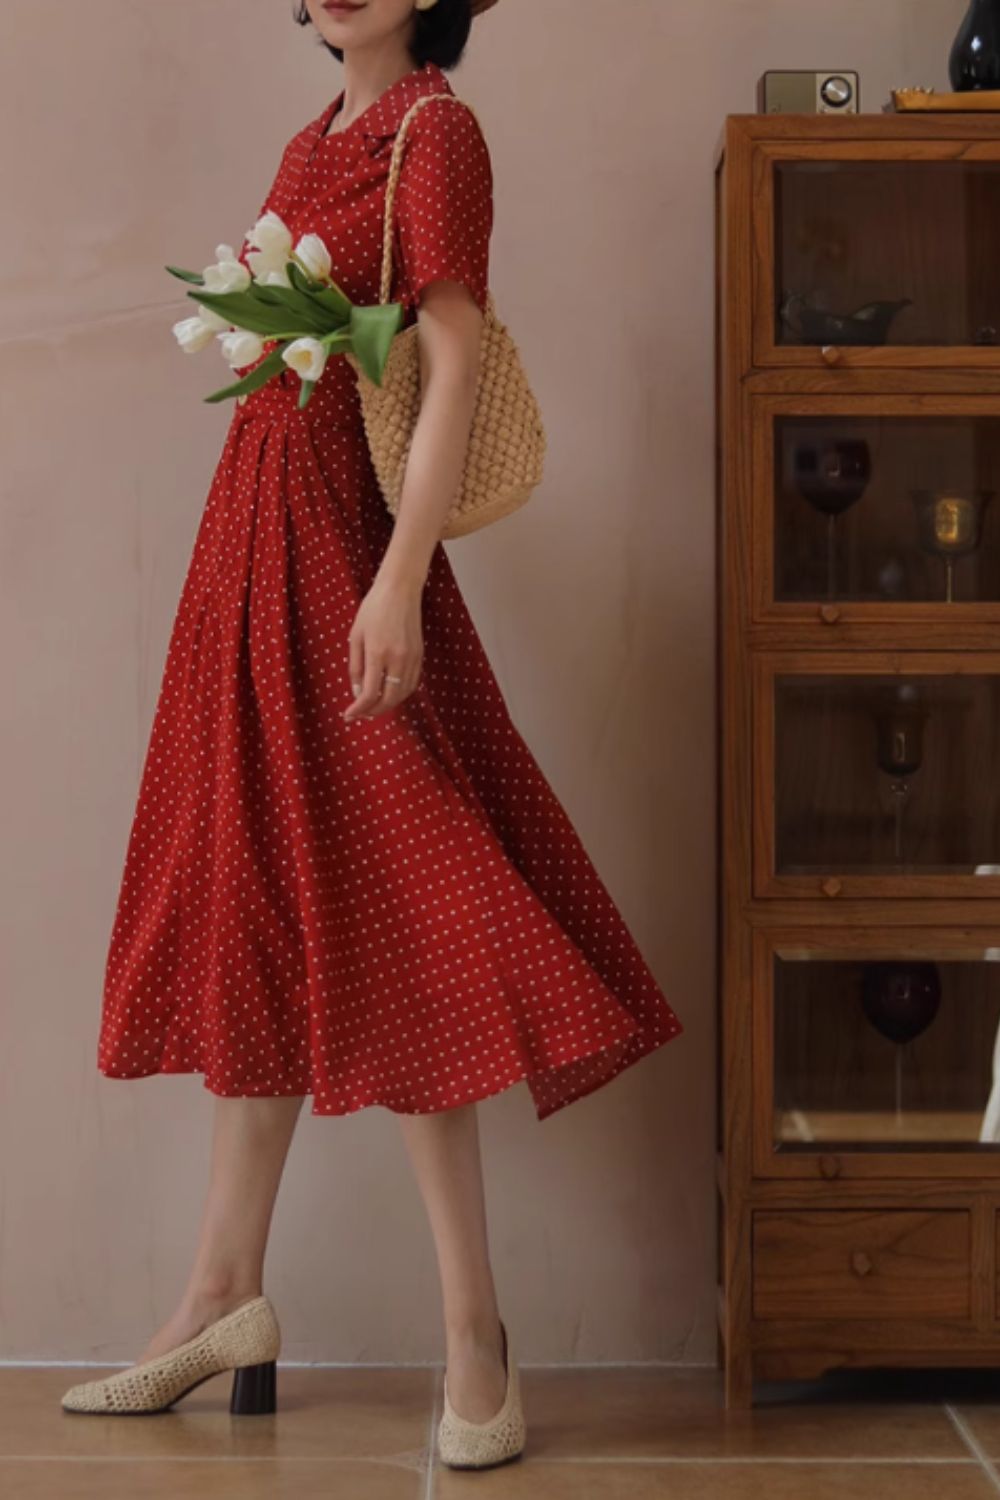 fit and flare red and white polka dot dresses 4850